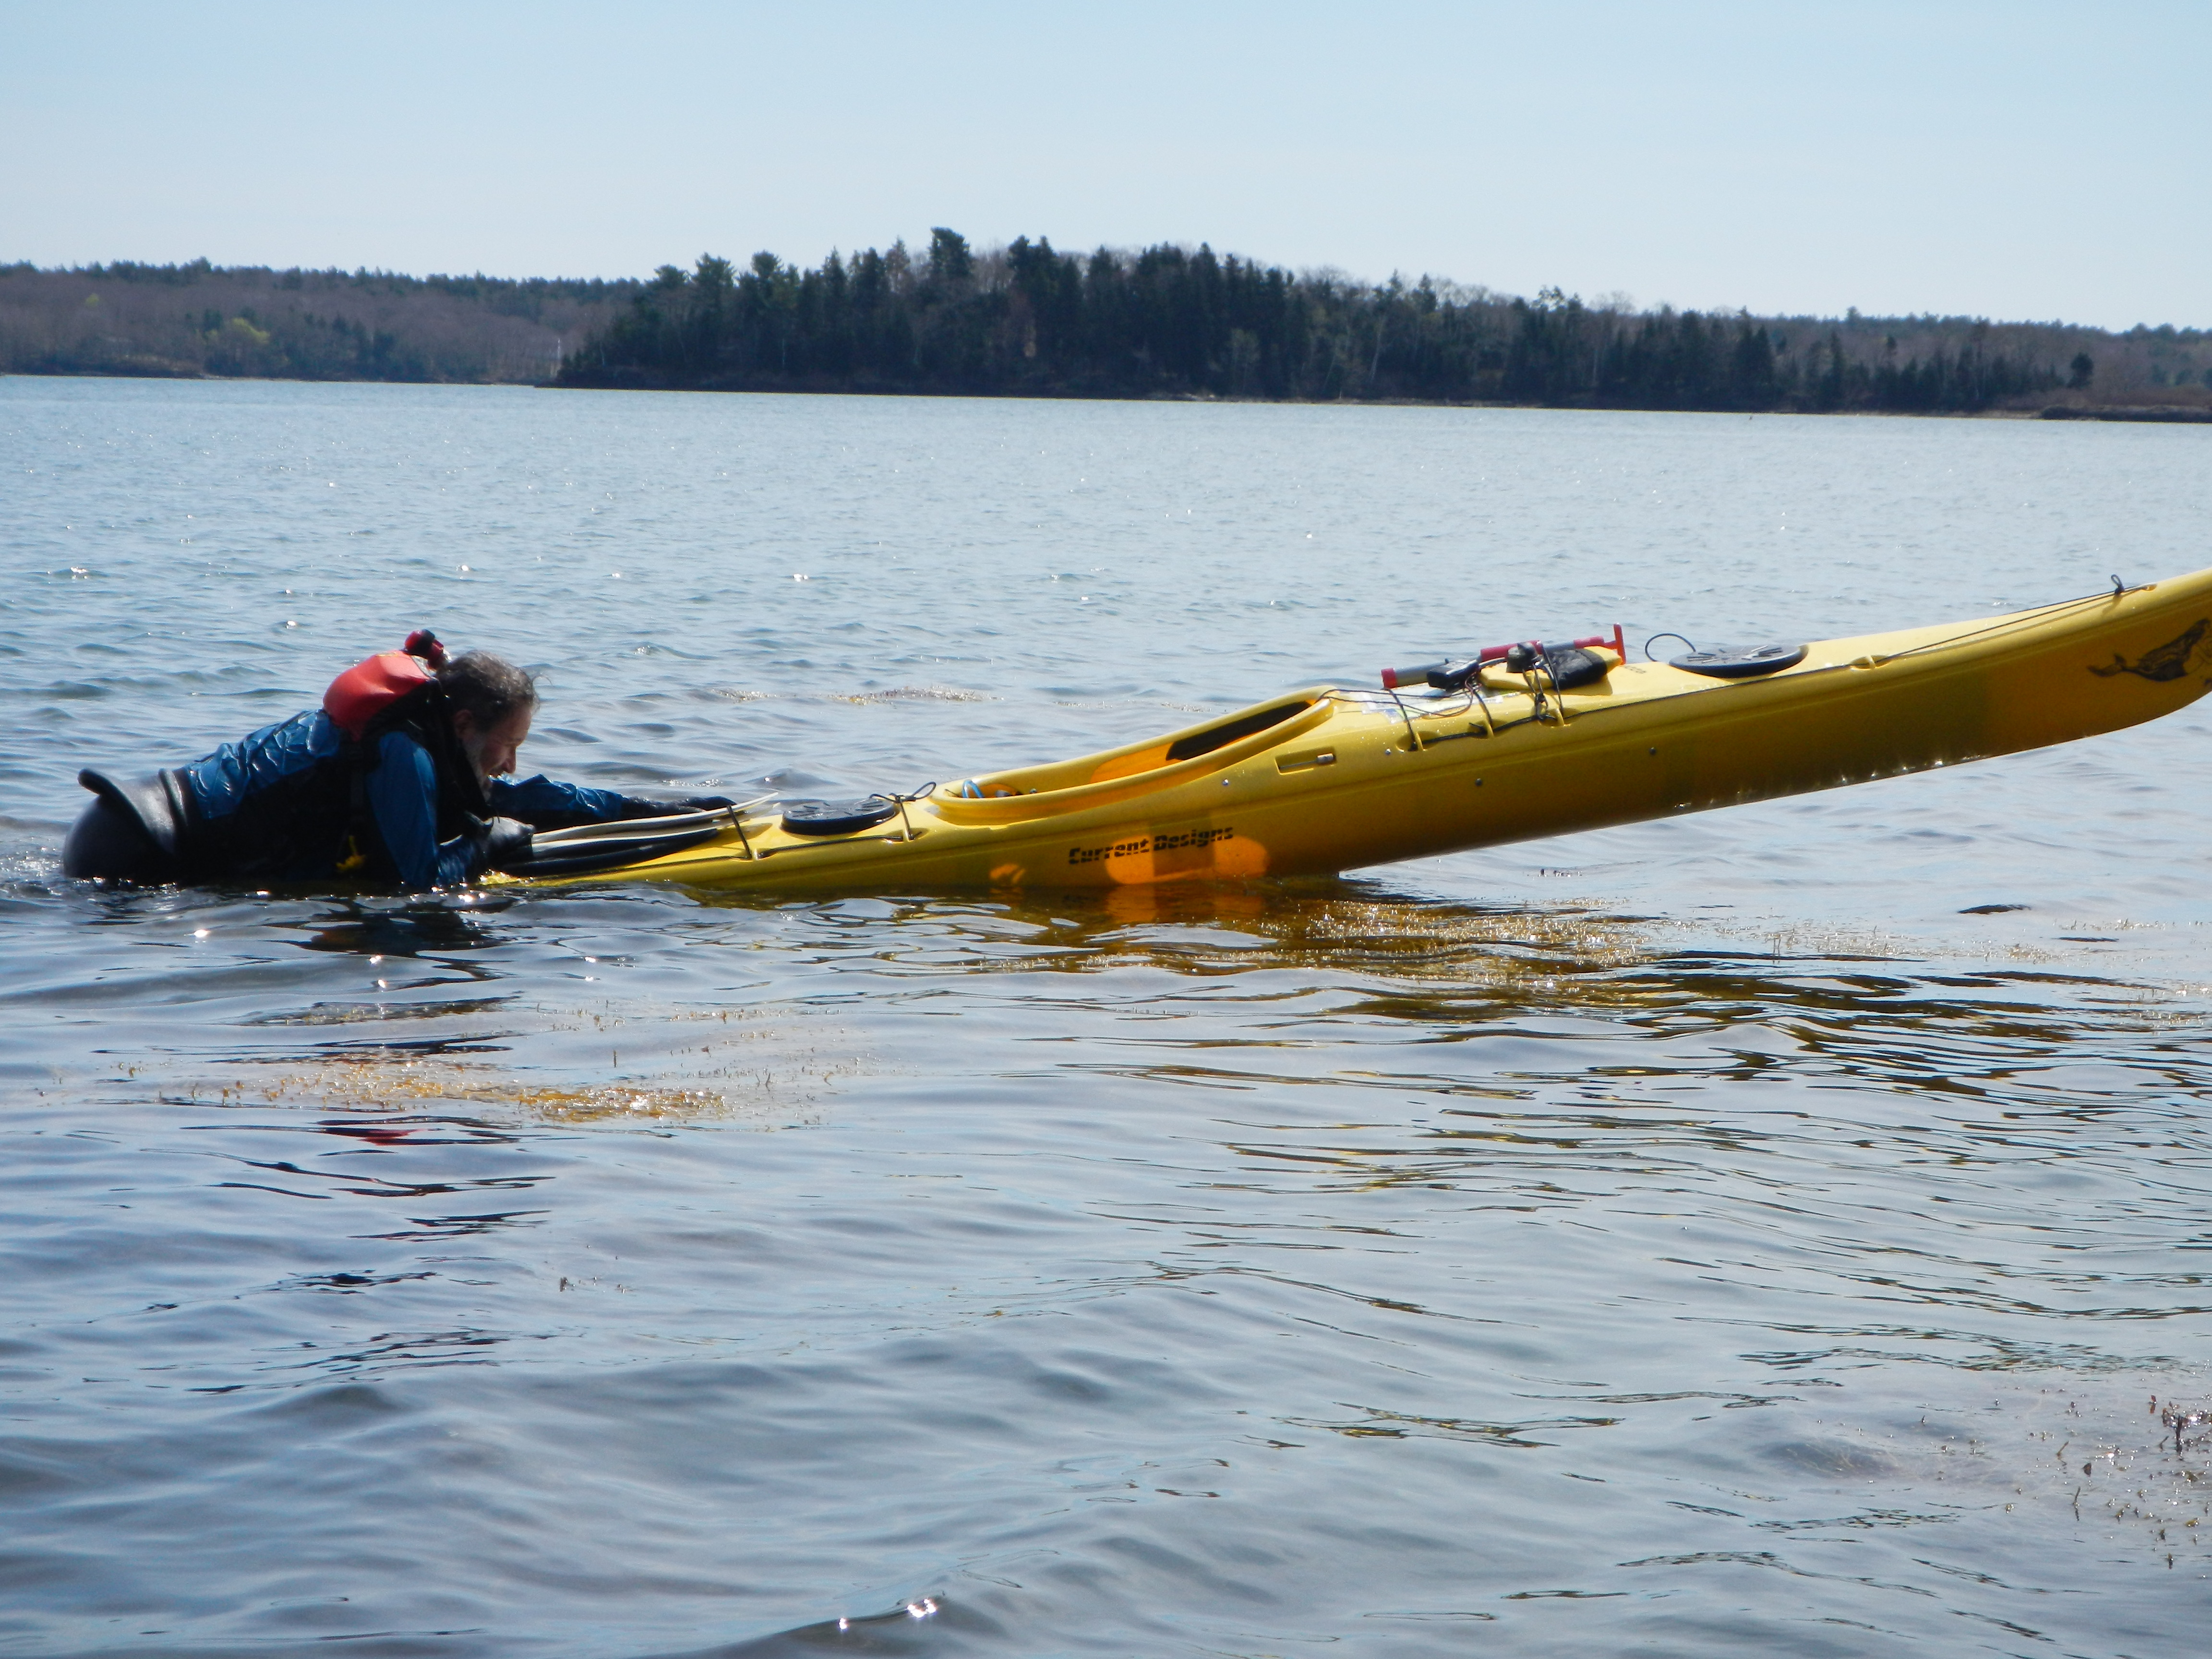 Trying to get into a sea kayak